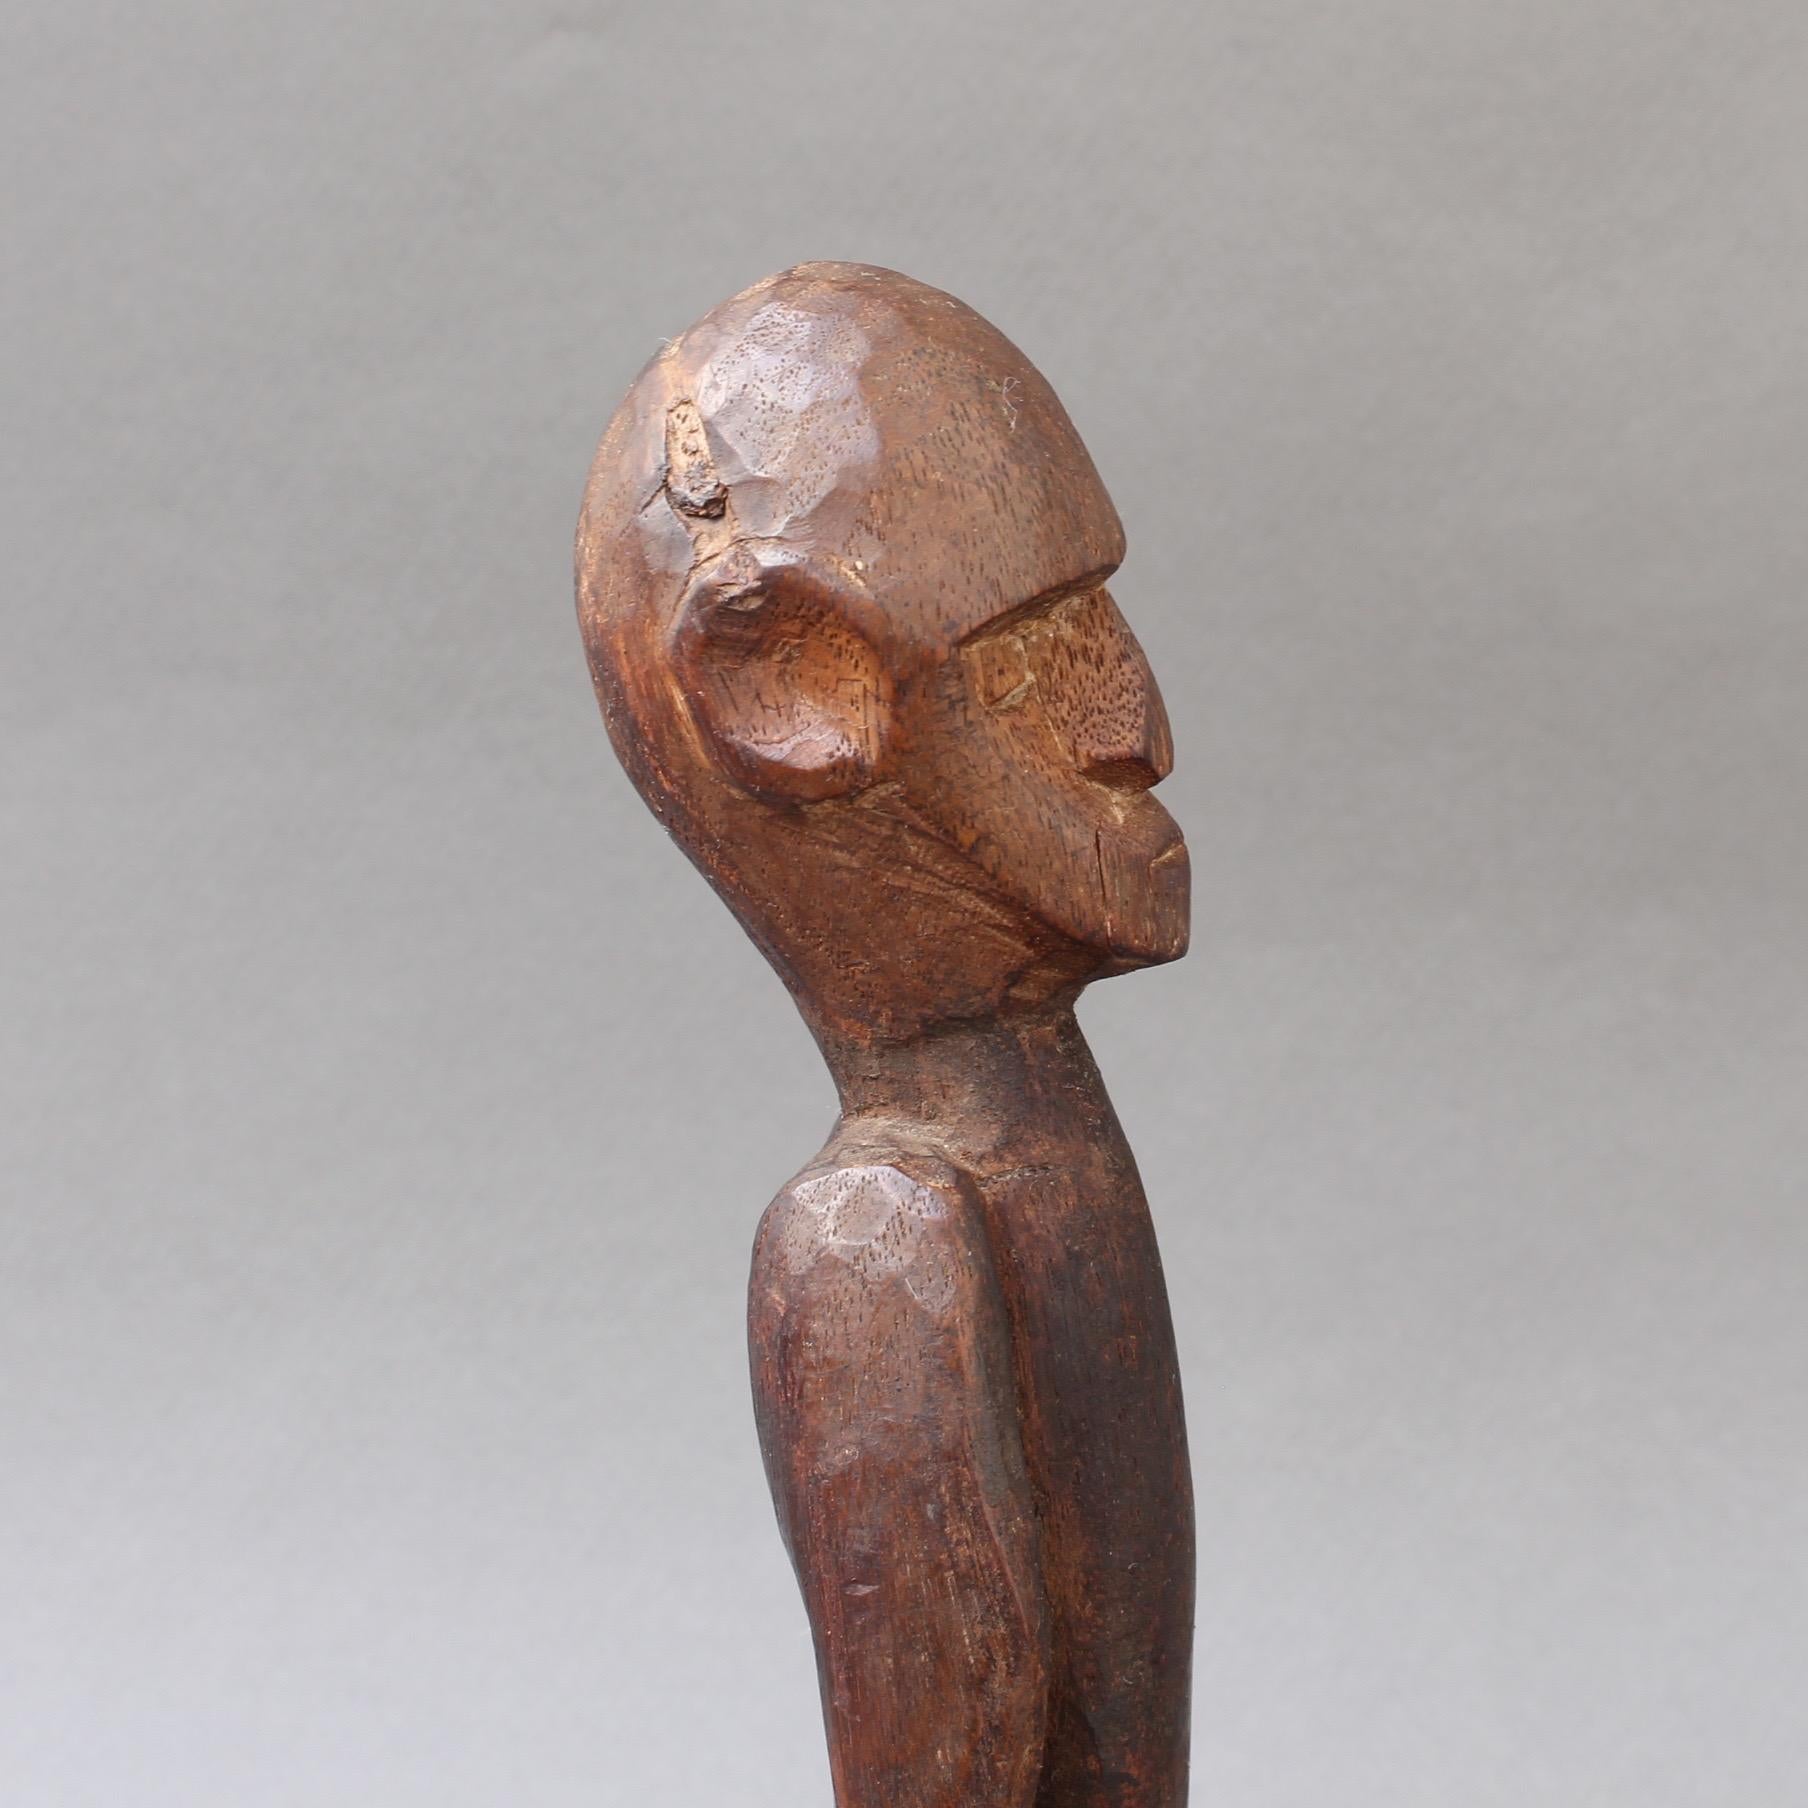 Wooden Sculpture or Carving of Sitting Figure from Sumba Island, Indonesia 3